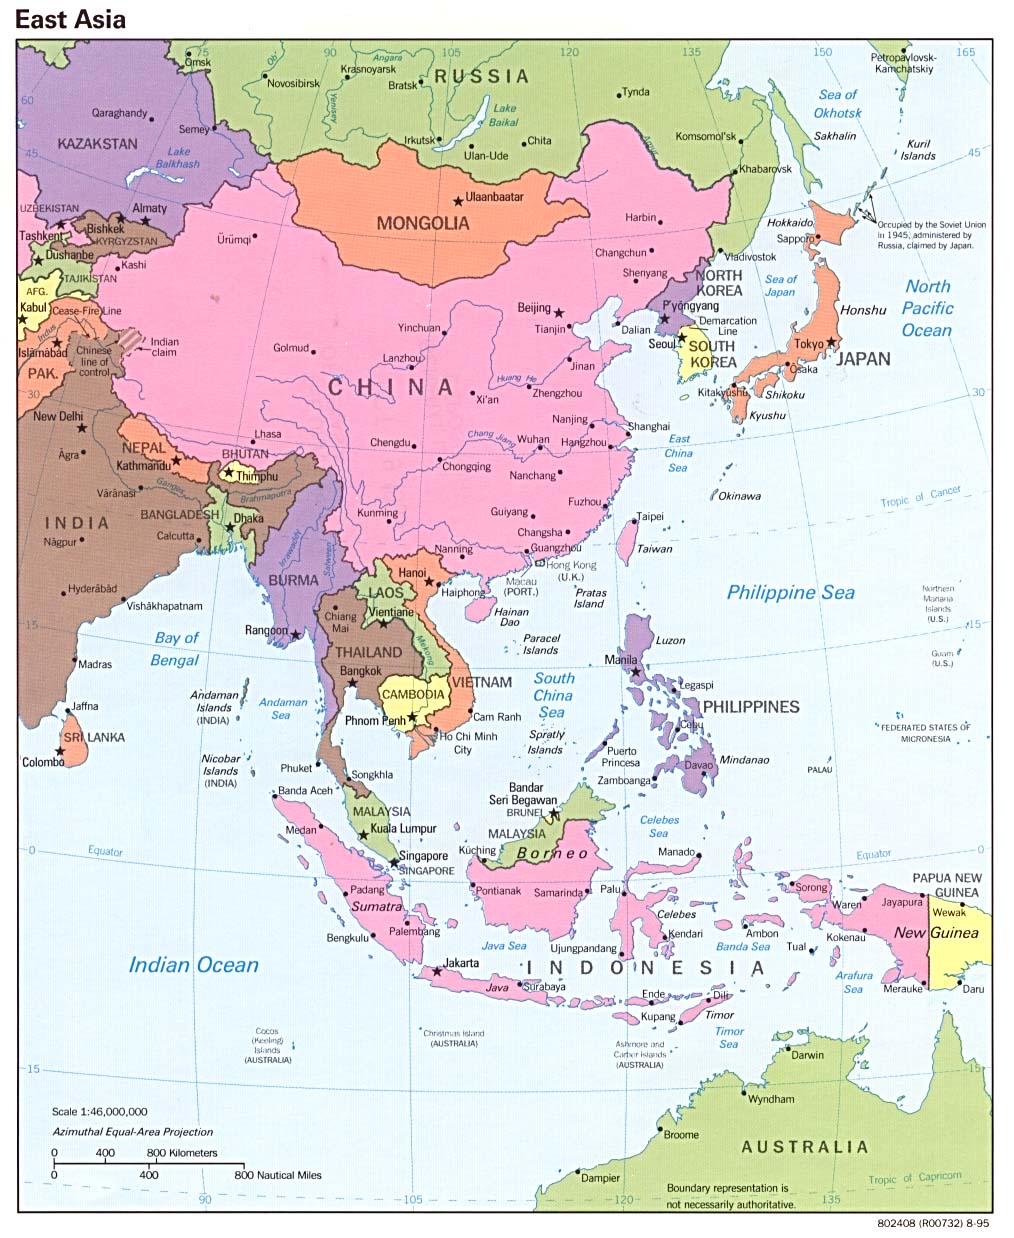 Reference Map Of East Asia